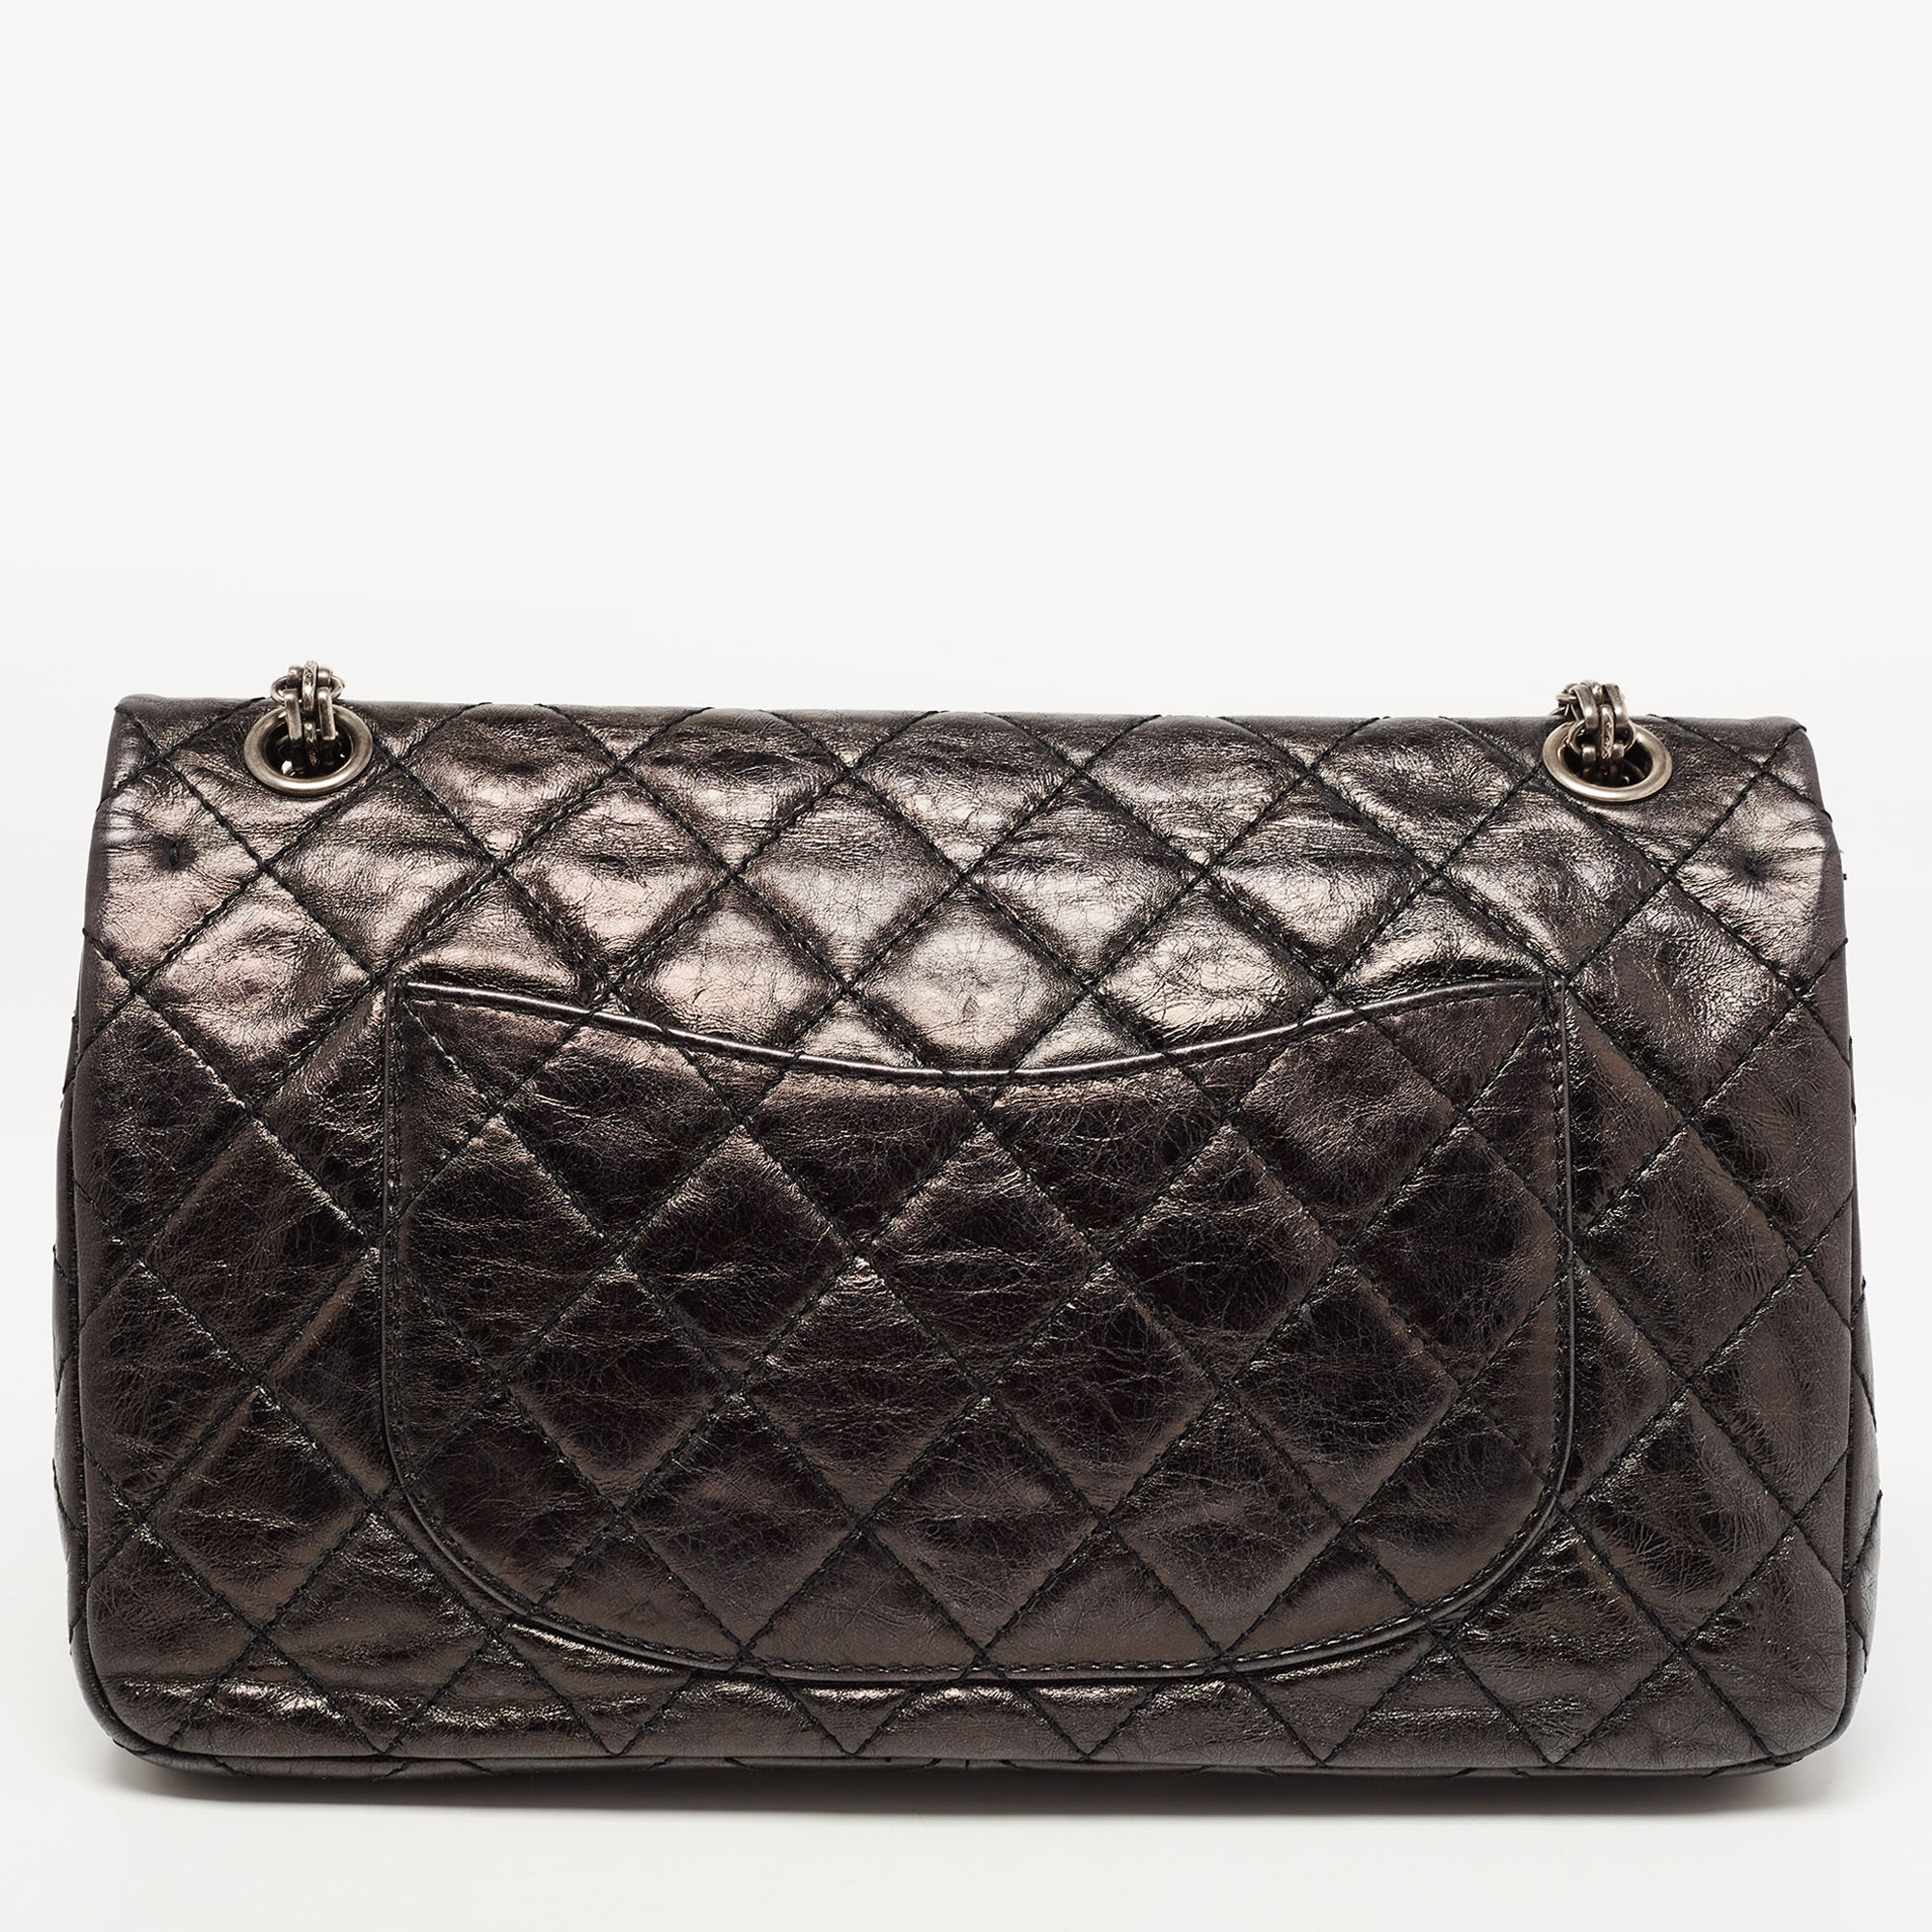 Chanel Metallic Grey/Black Quilted Leather 226 Reissue 2.55 Flap Bag